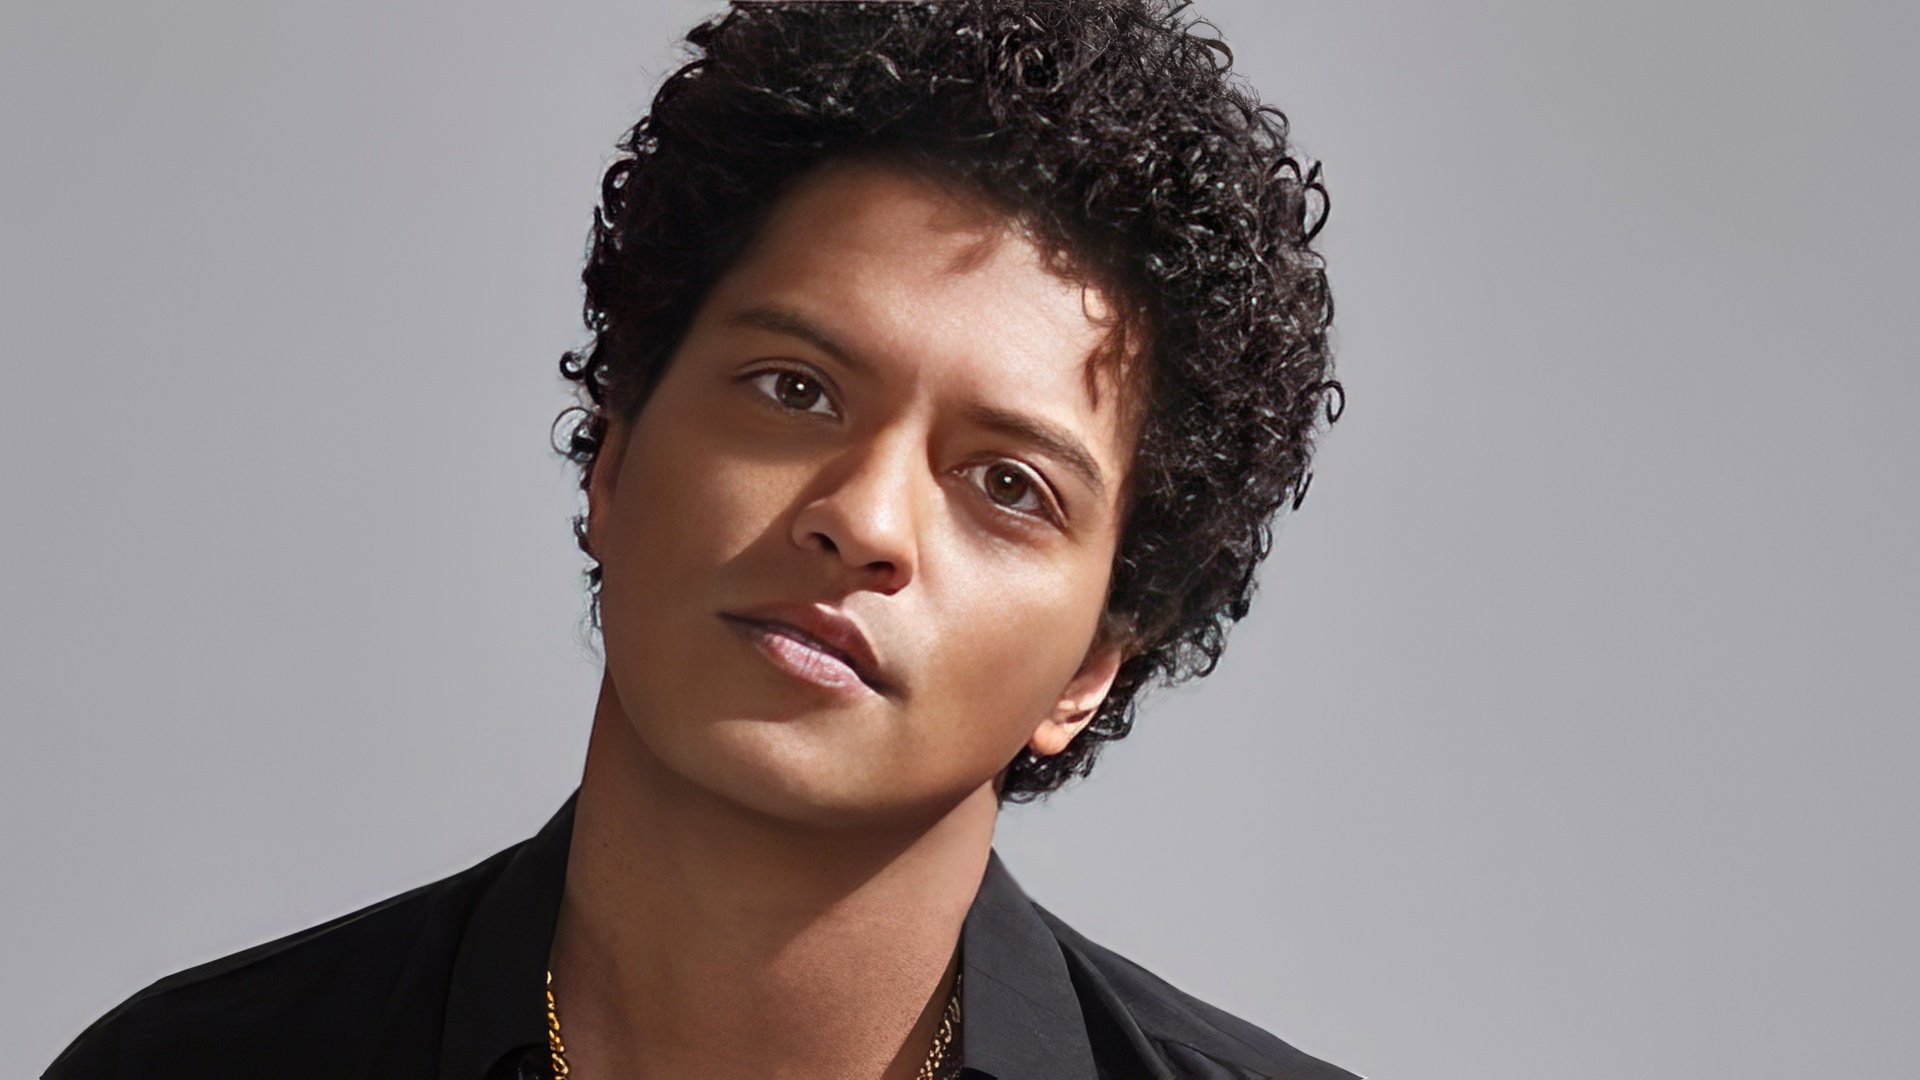 In 2003 Bruno Mars moved to America